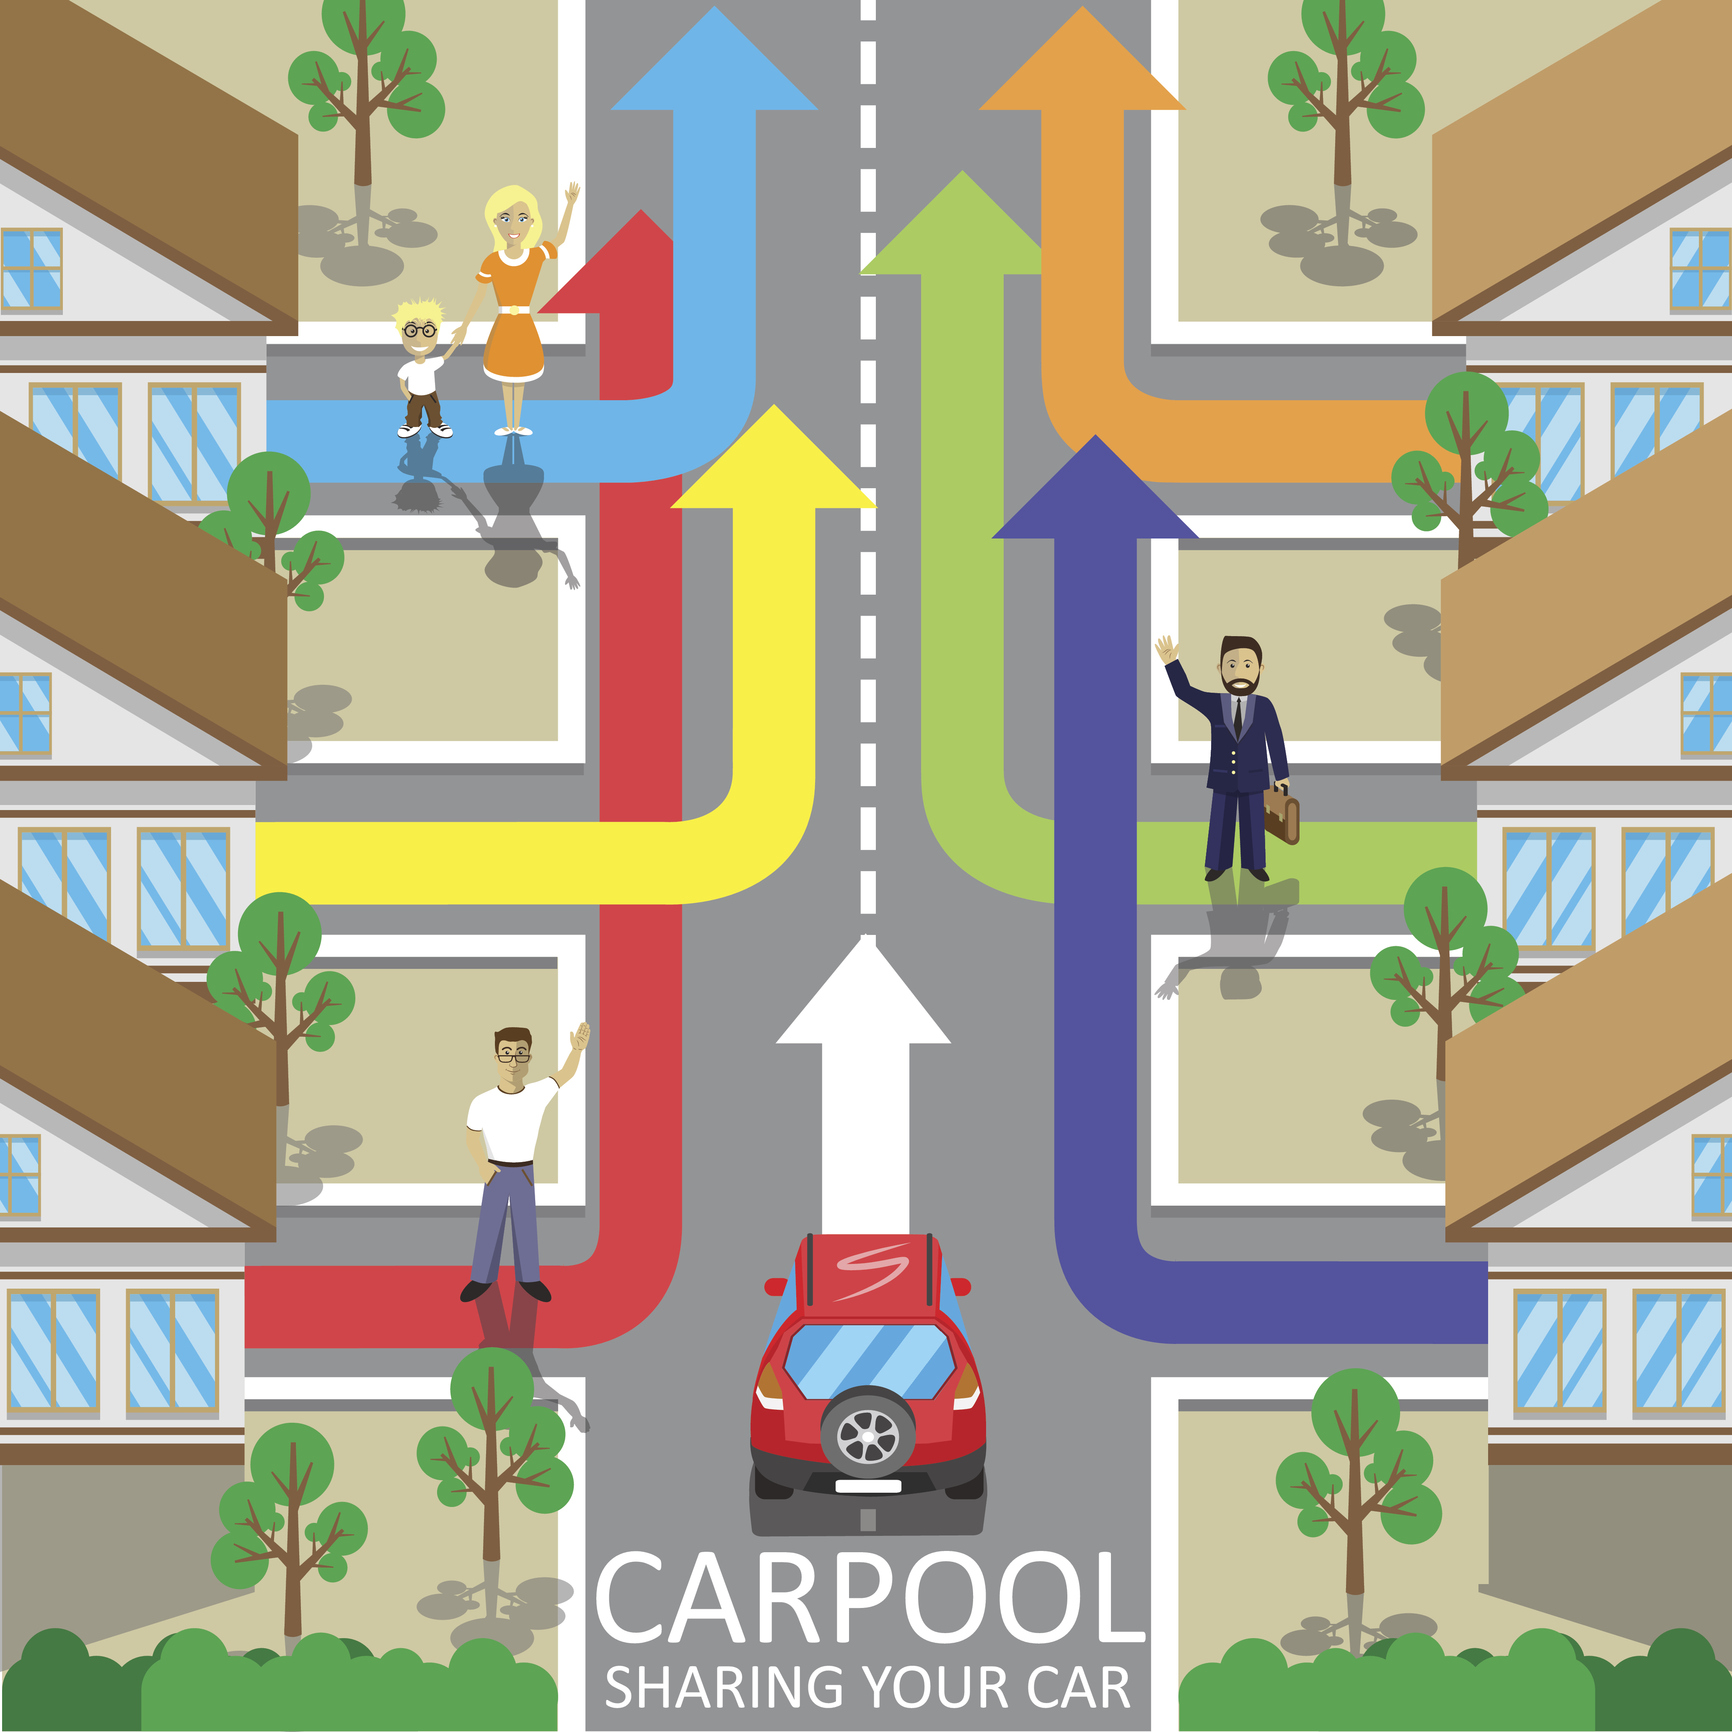 Illustration of a red car driving down a residential street with people standing in front of three different houses hailing a ride.